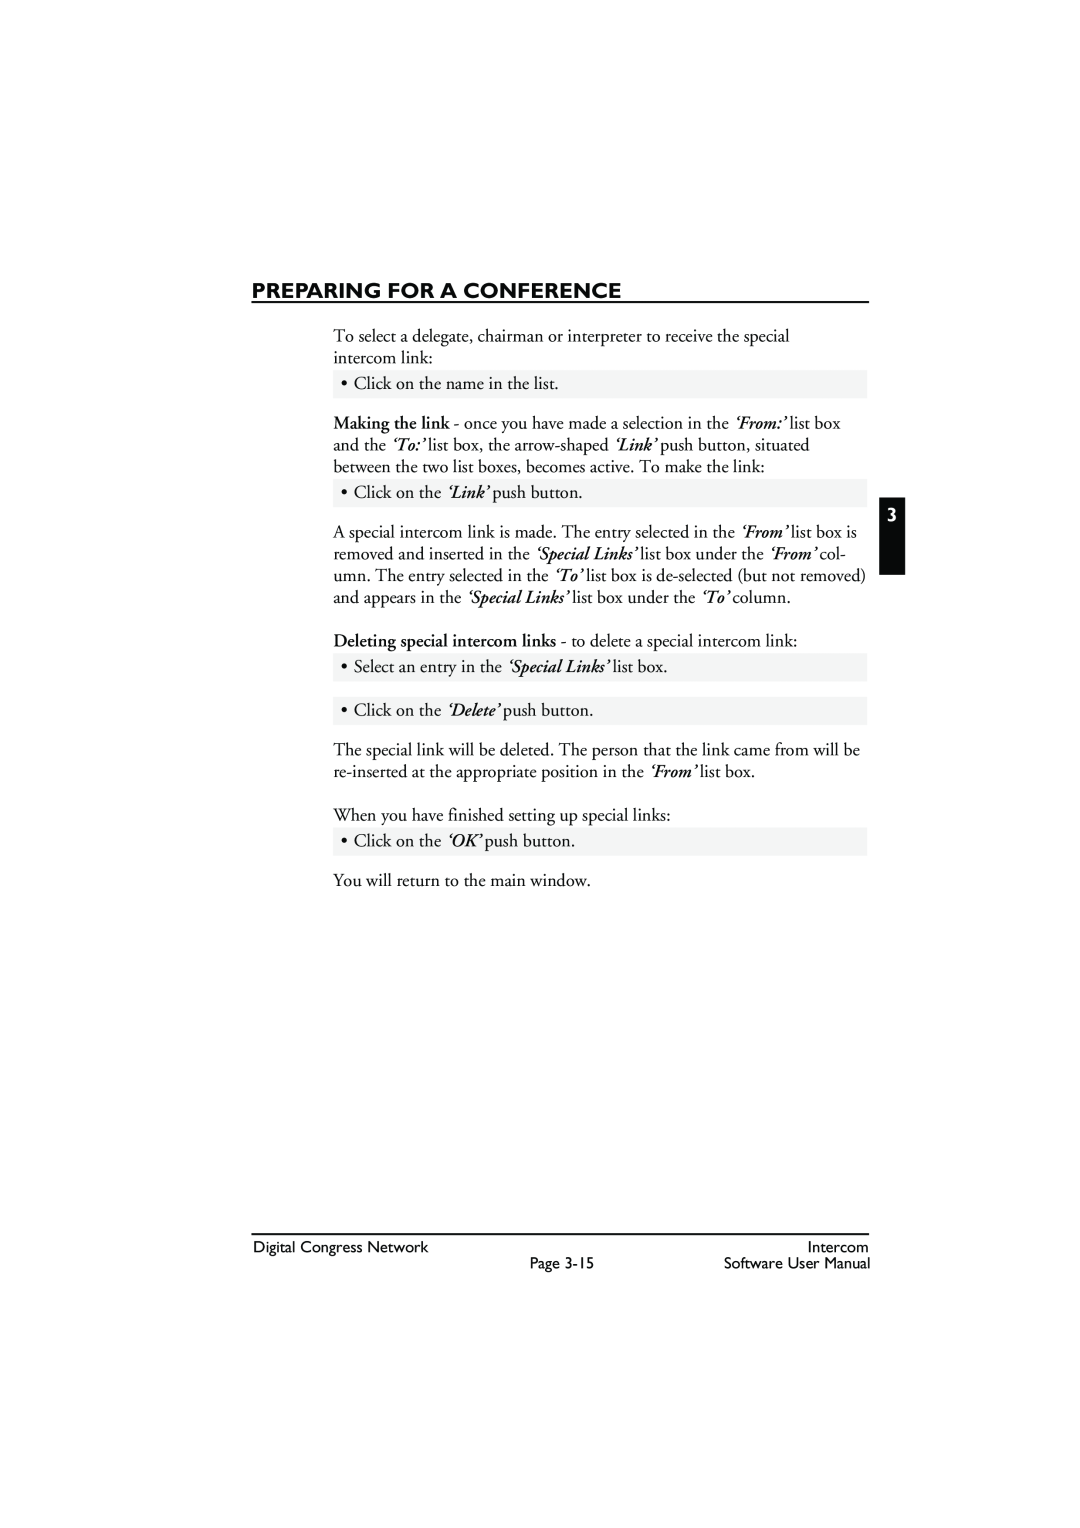 Bosch Appliances LBB 3573 user manual Preparing For A Conference, Click on the name in the list 